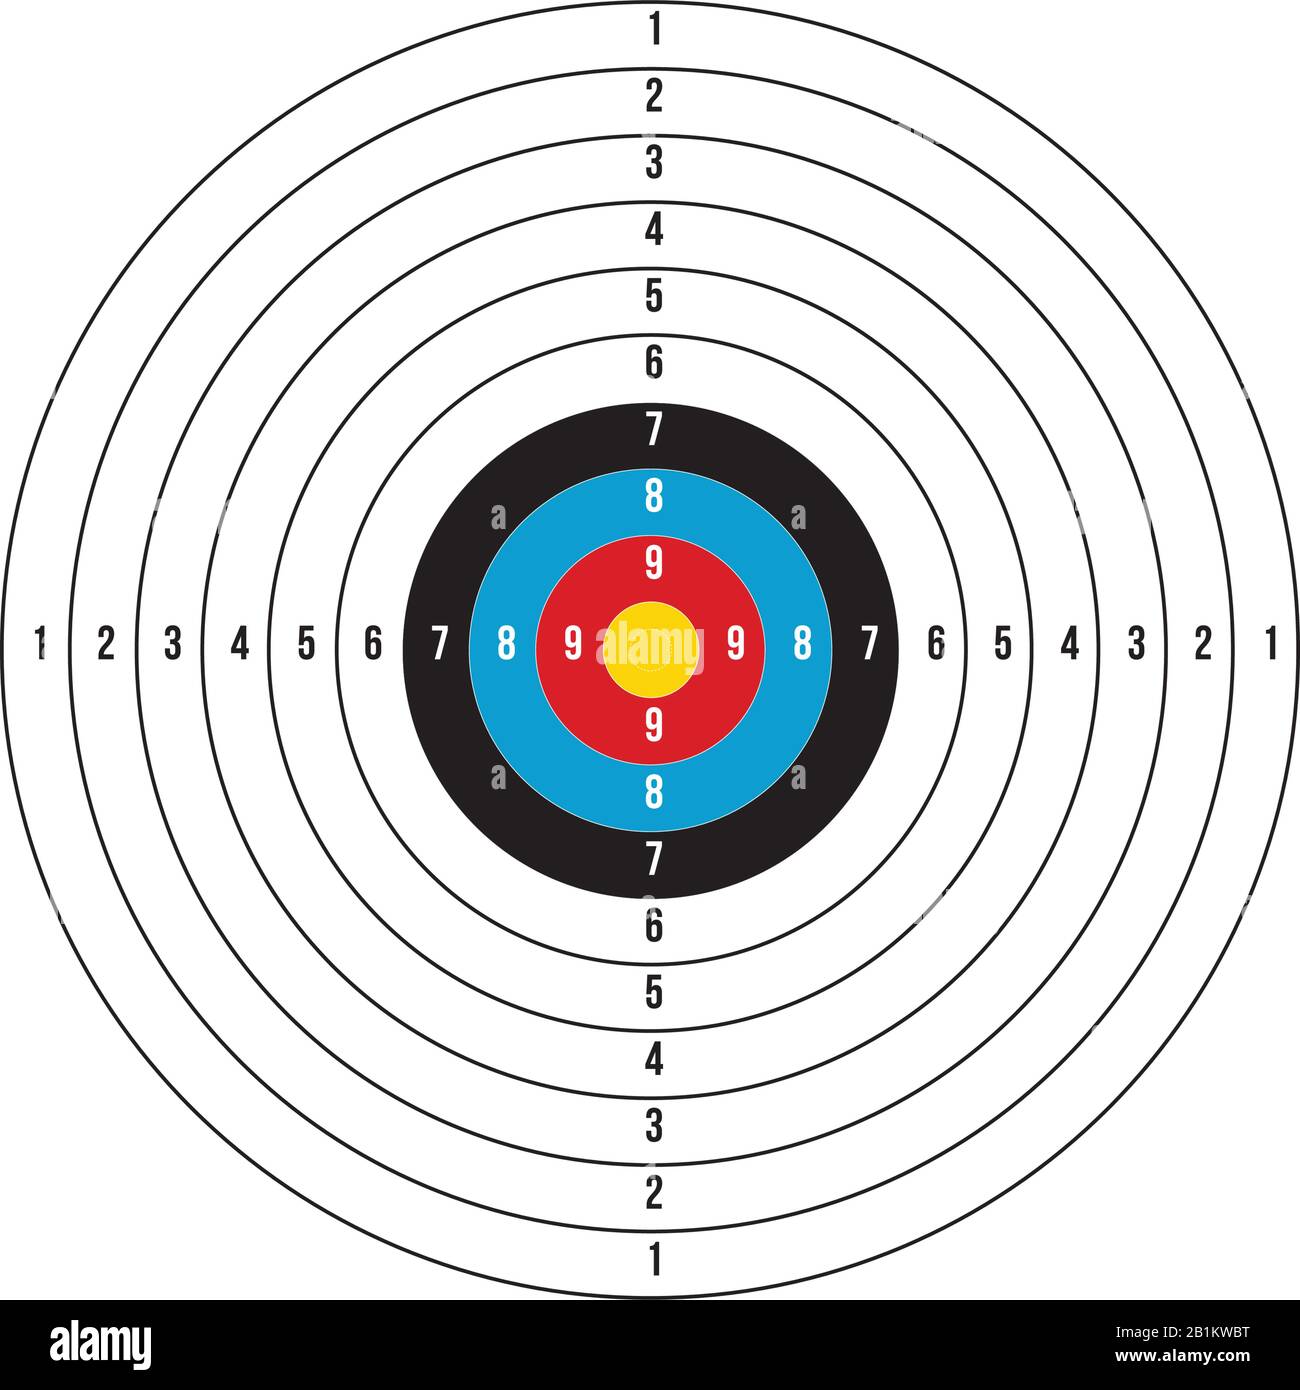 olympic shooting archery target printable stock vector illustration isolated on white background stock vector image art alamy